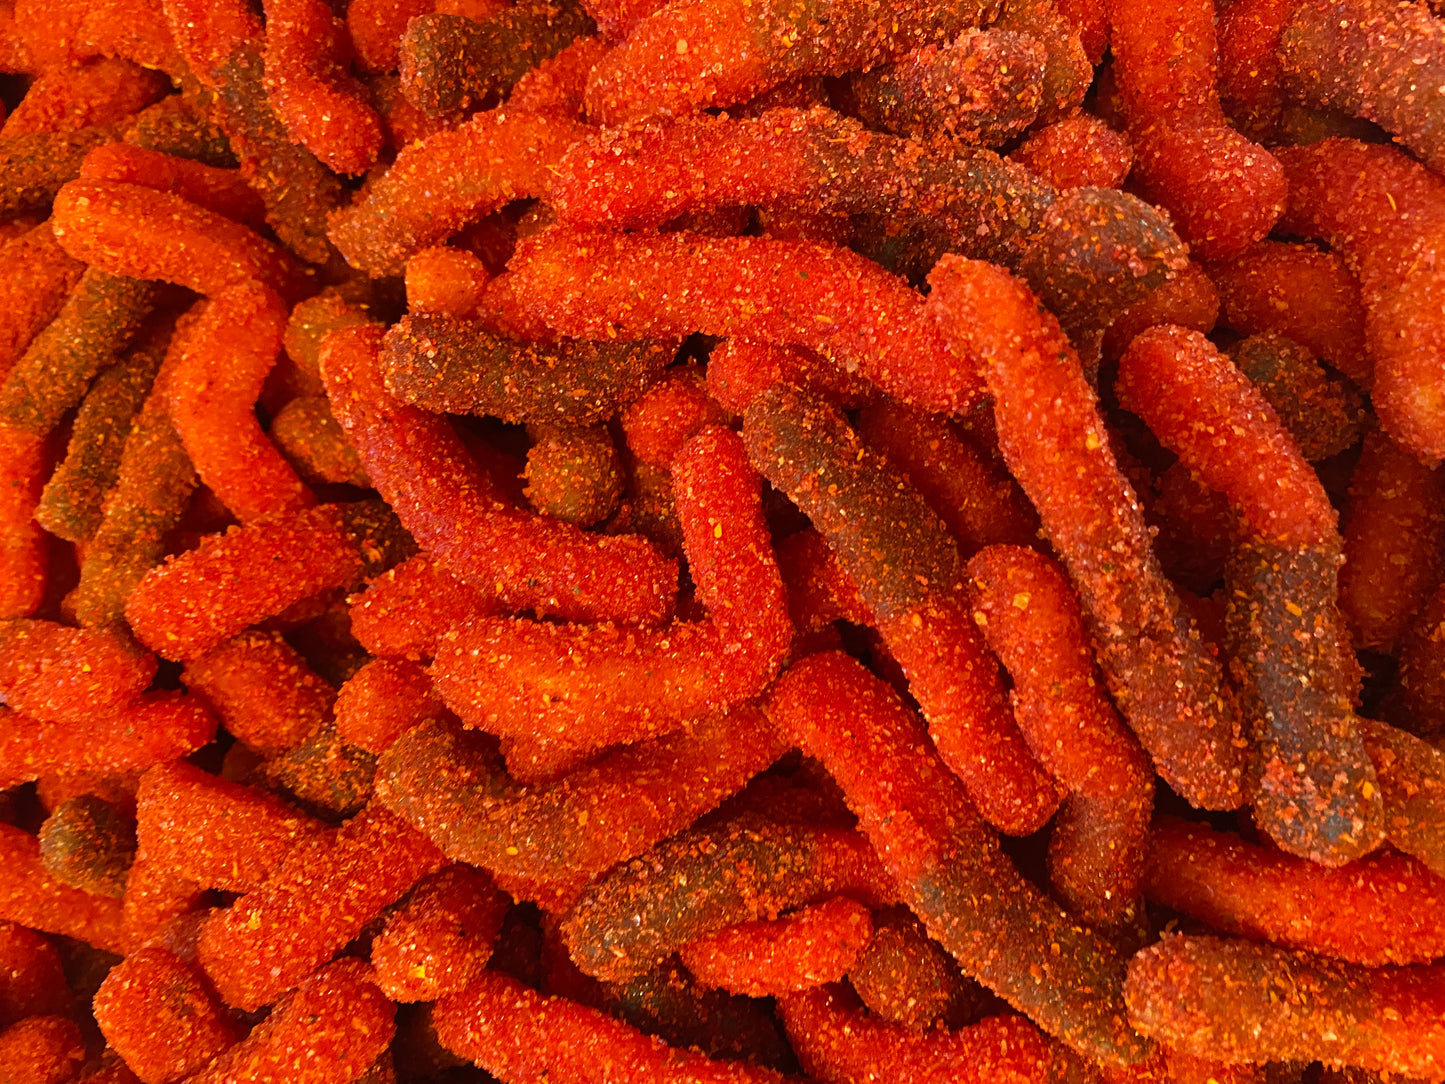 Spicy worms